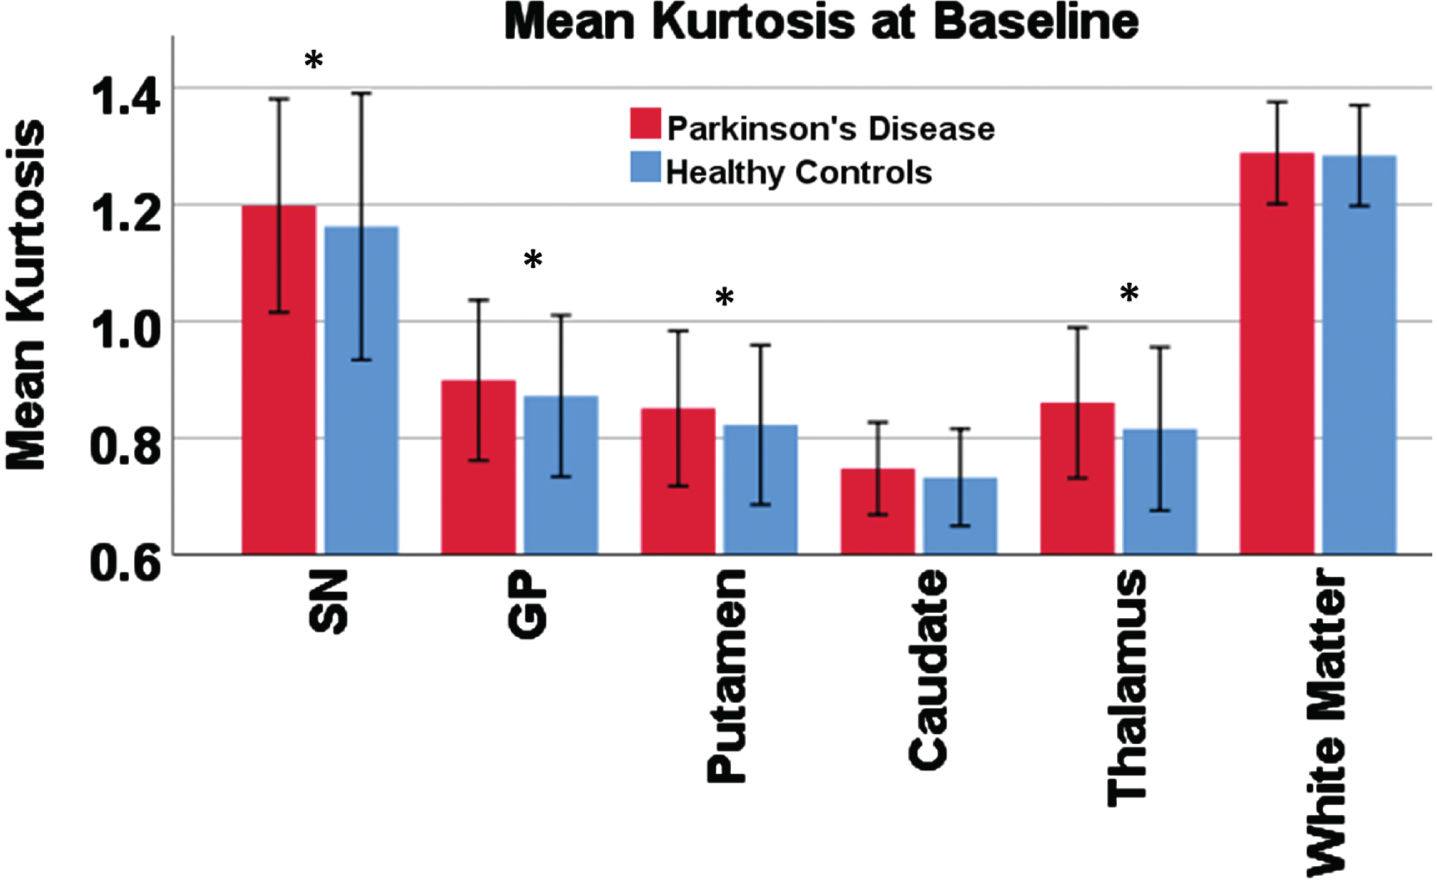 Mean kurtosis in each region of interest compared between groups. Bar chart showing the result of the group comparison for baseline mean kurtosis. Error bars show 2 standard deviations. An asterisk is shown for regions with significant group difference in a linear regression model controlling for age, sex, and levodopa-equivalent dose.